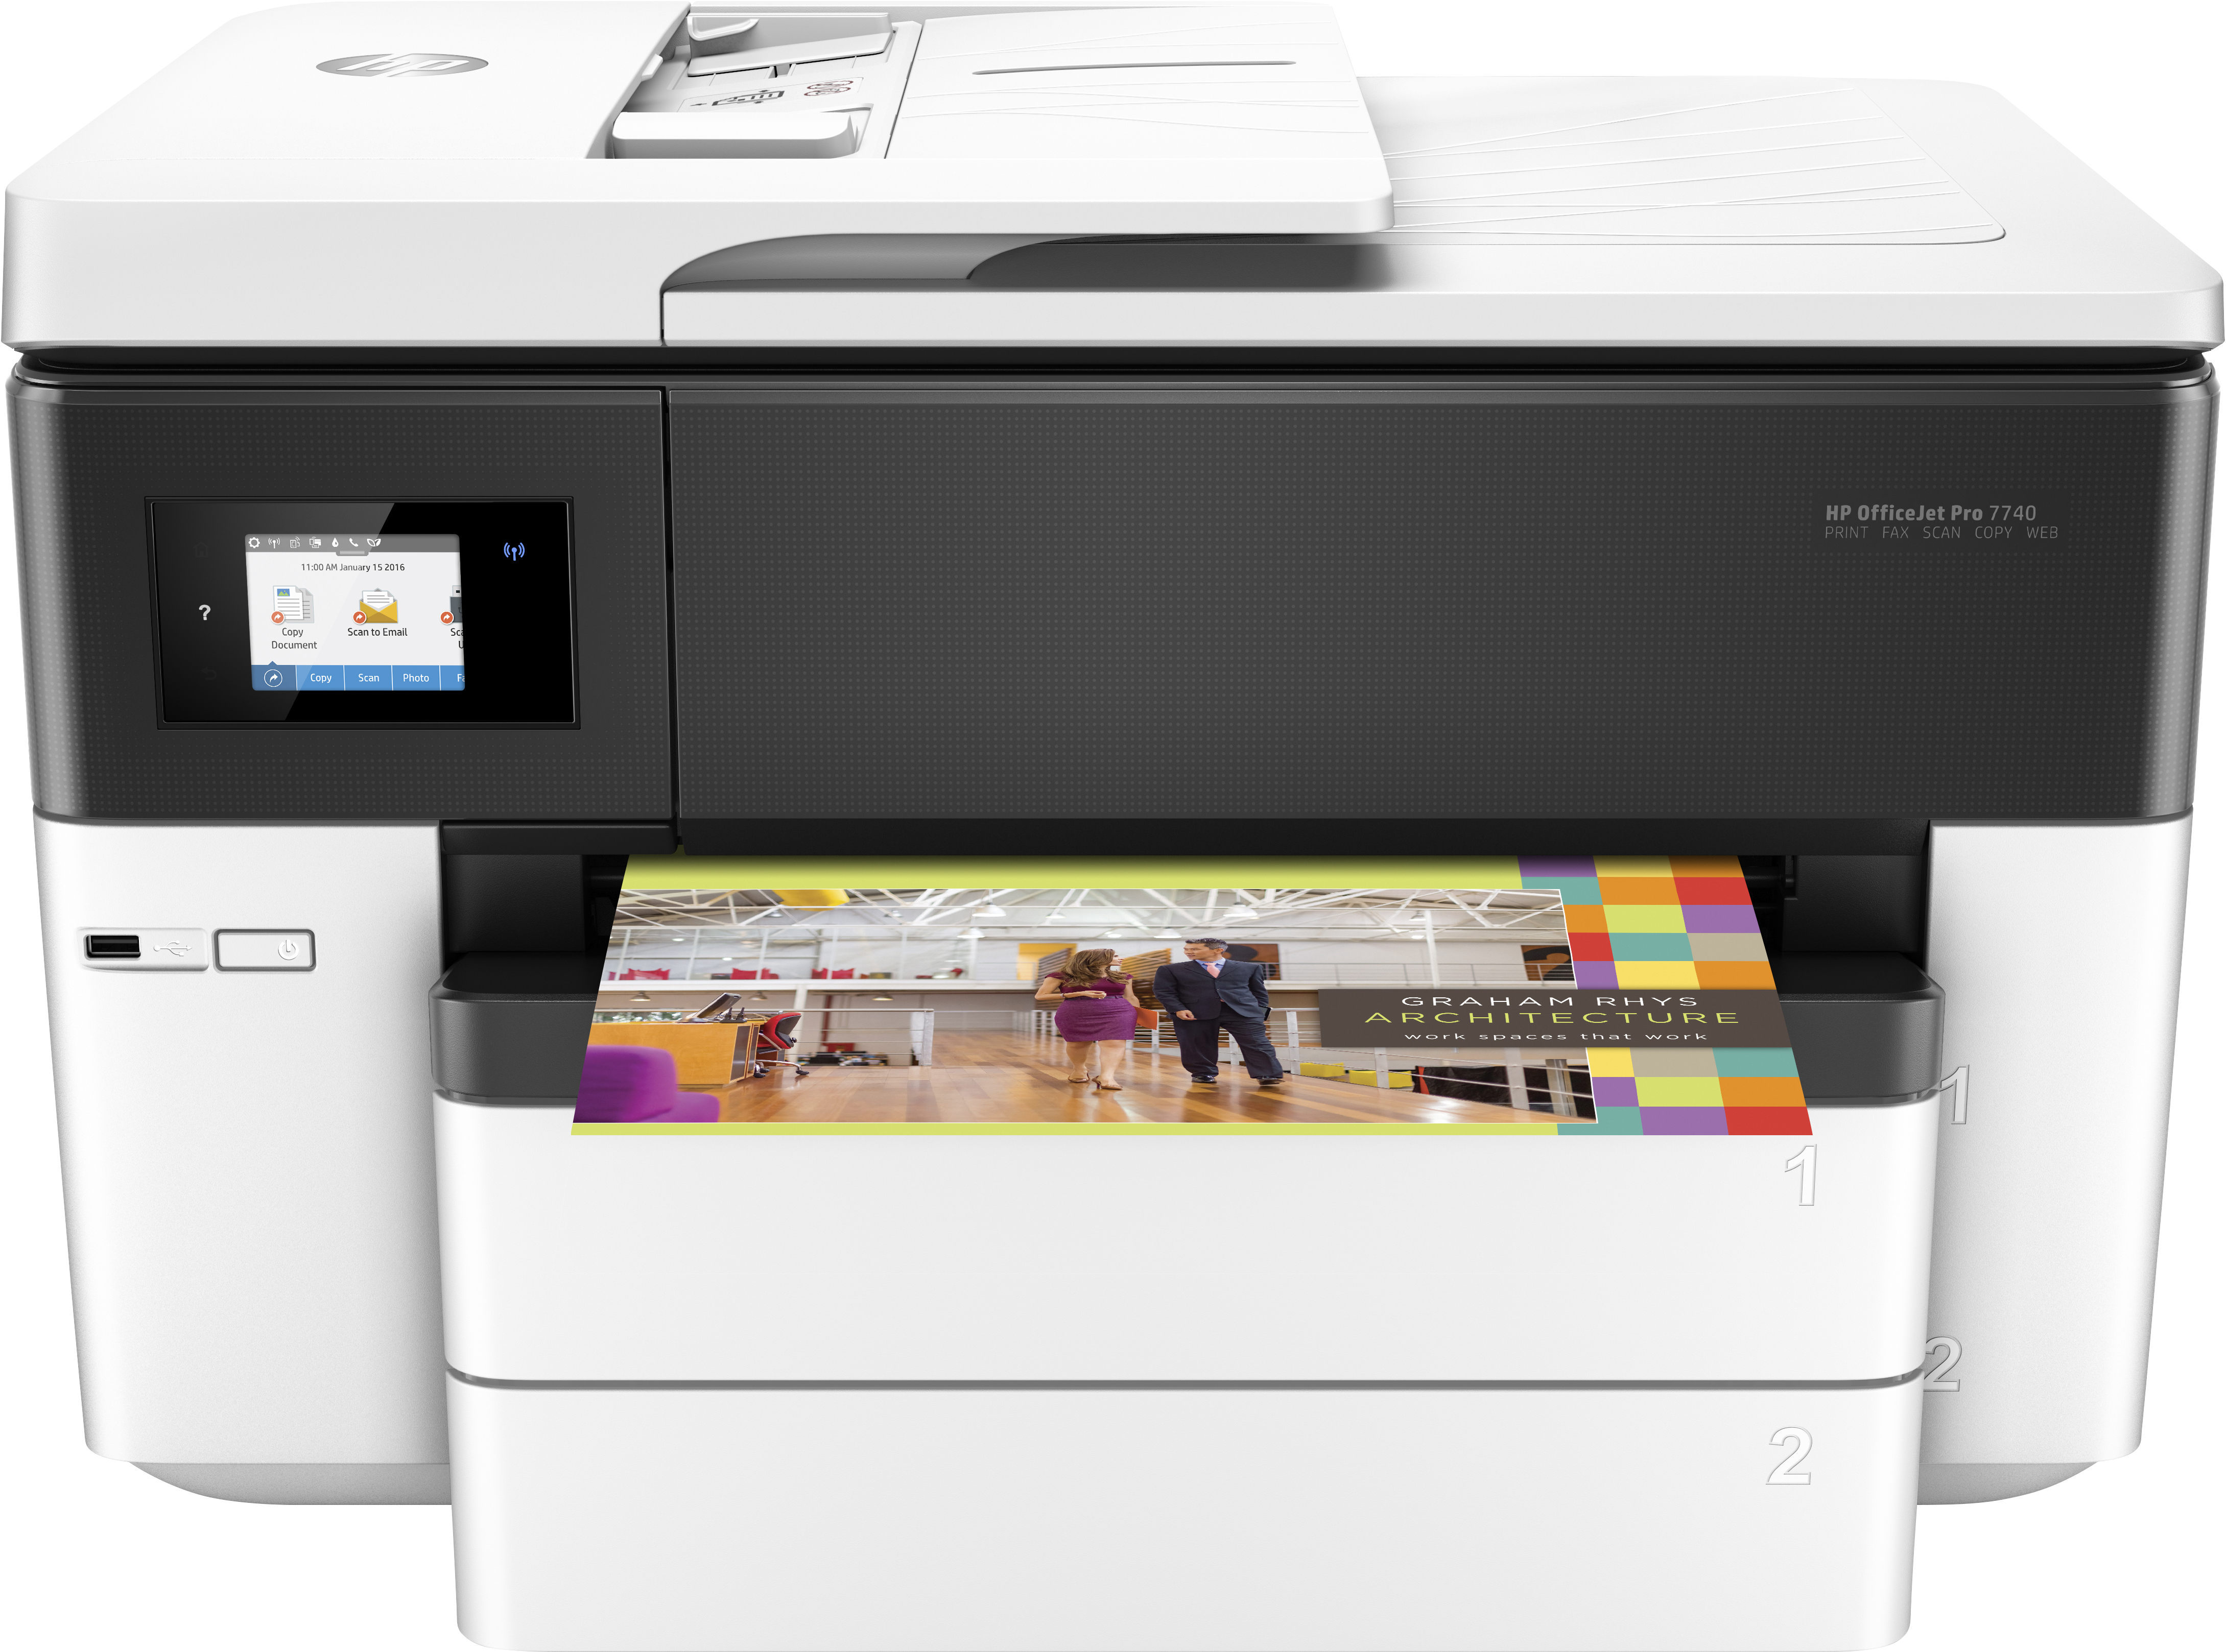 HP Officejet Pro 7740 All-in-One - Multifunktionsdrucker - Farbe - Tintenstrahl - A3/Ledger (297 x 432 mm)